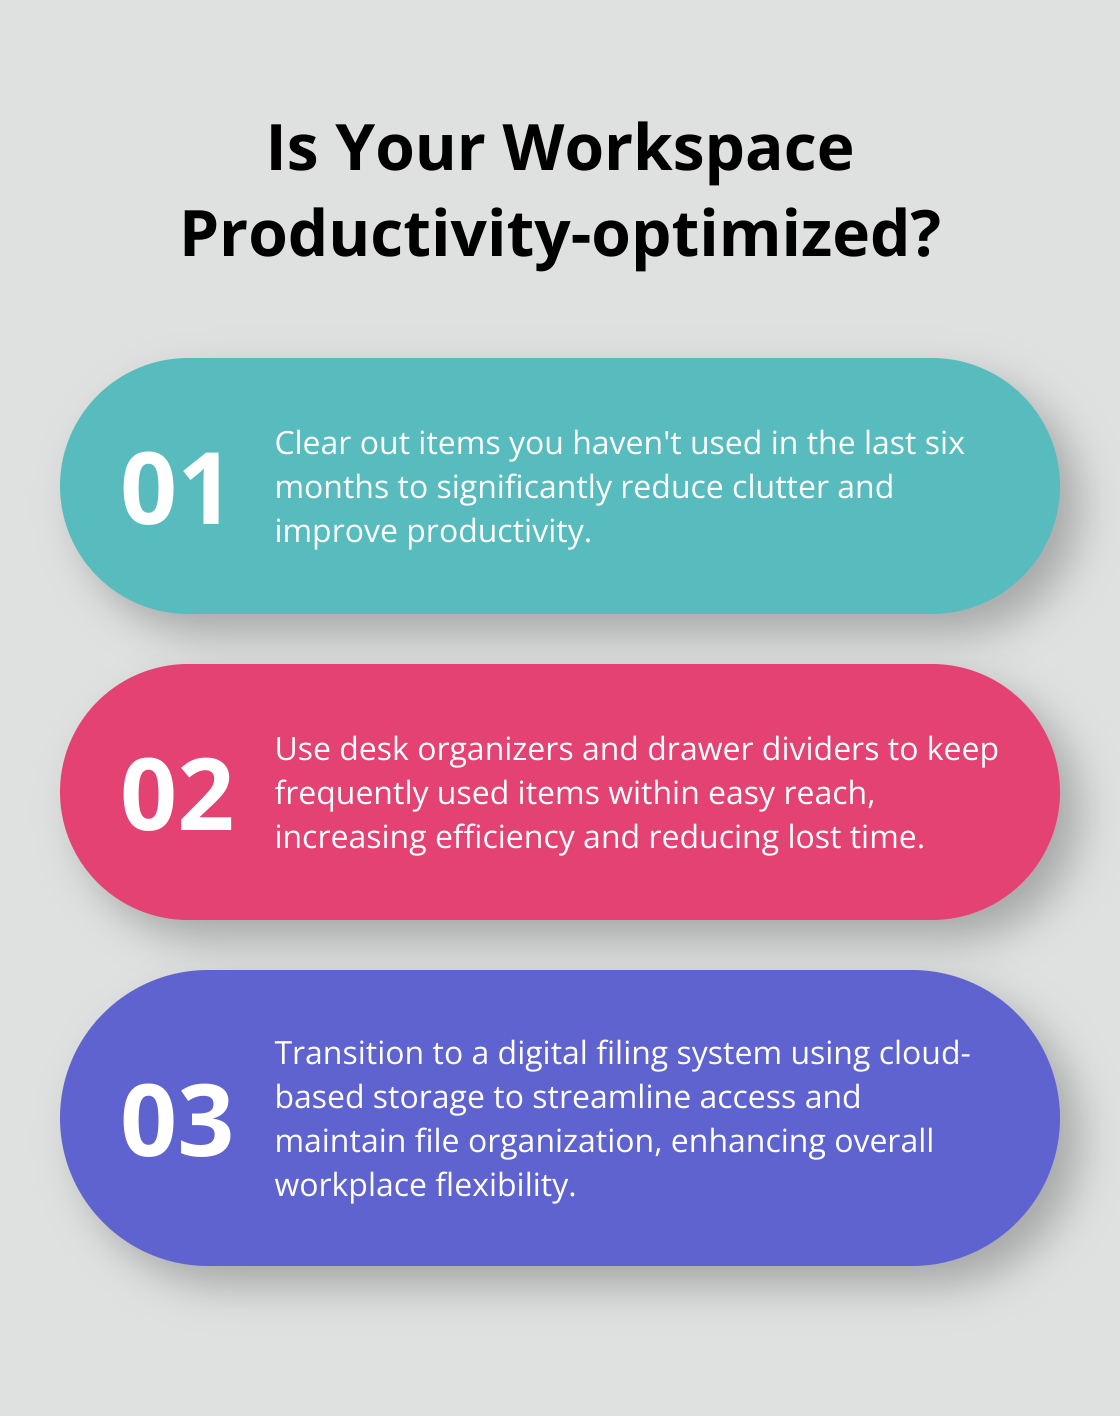 Fact - Is Your Workspace Productivity-optimized?